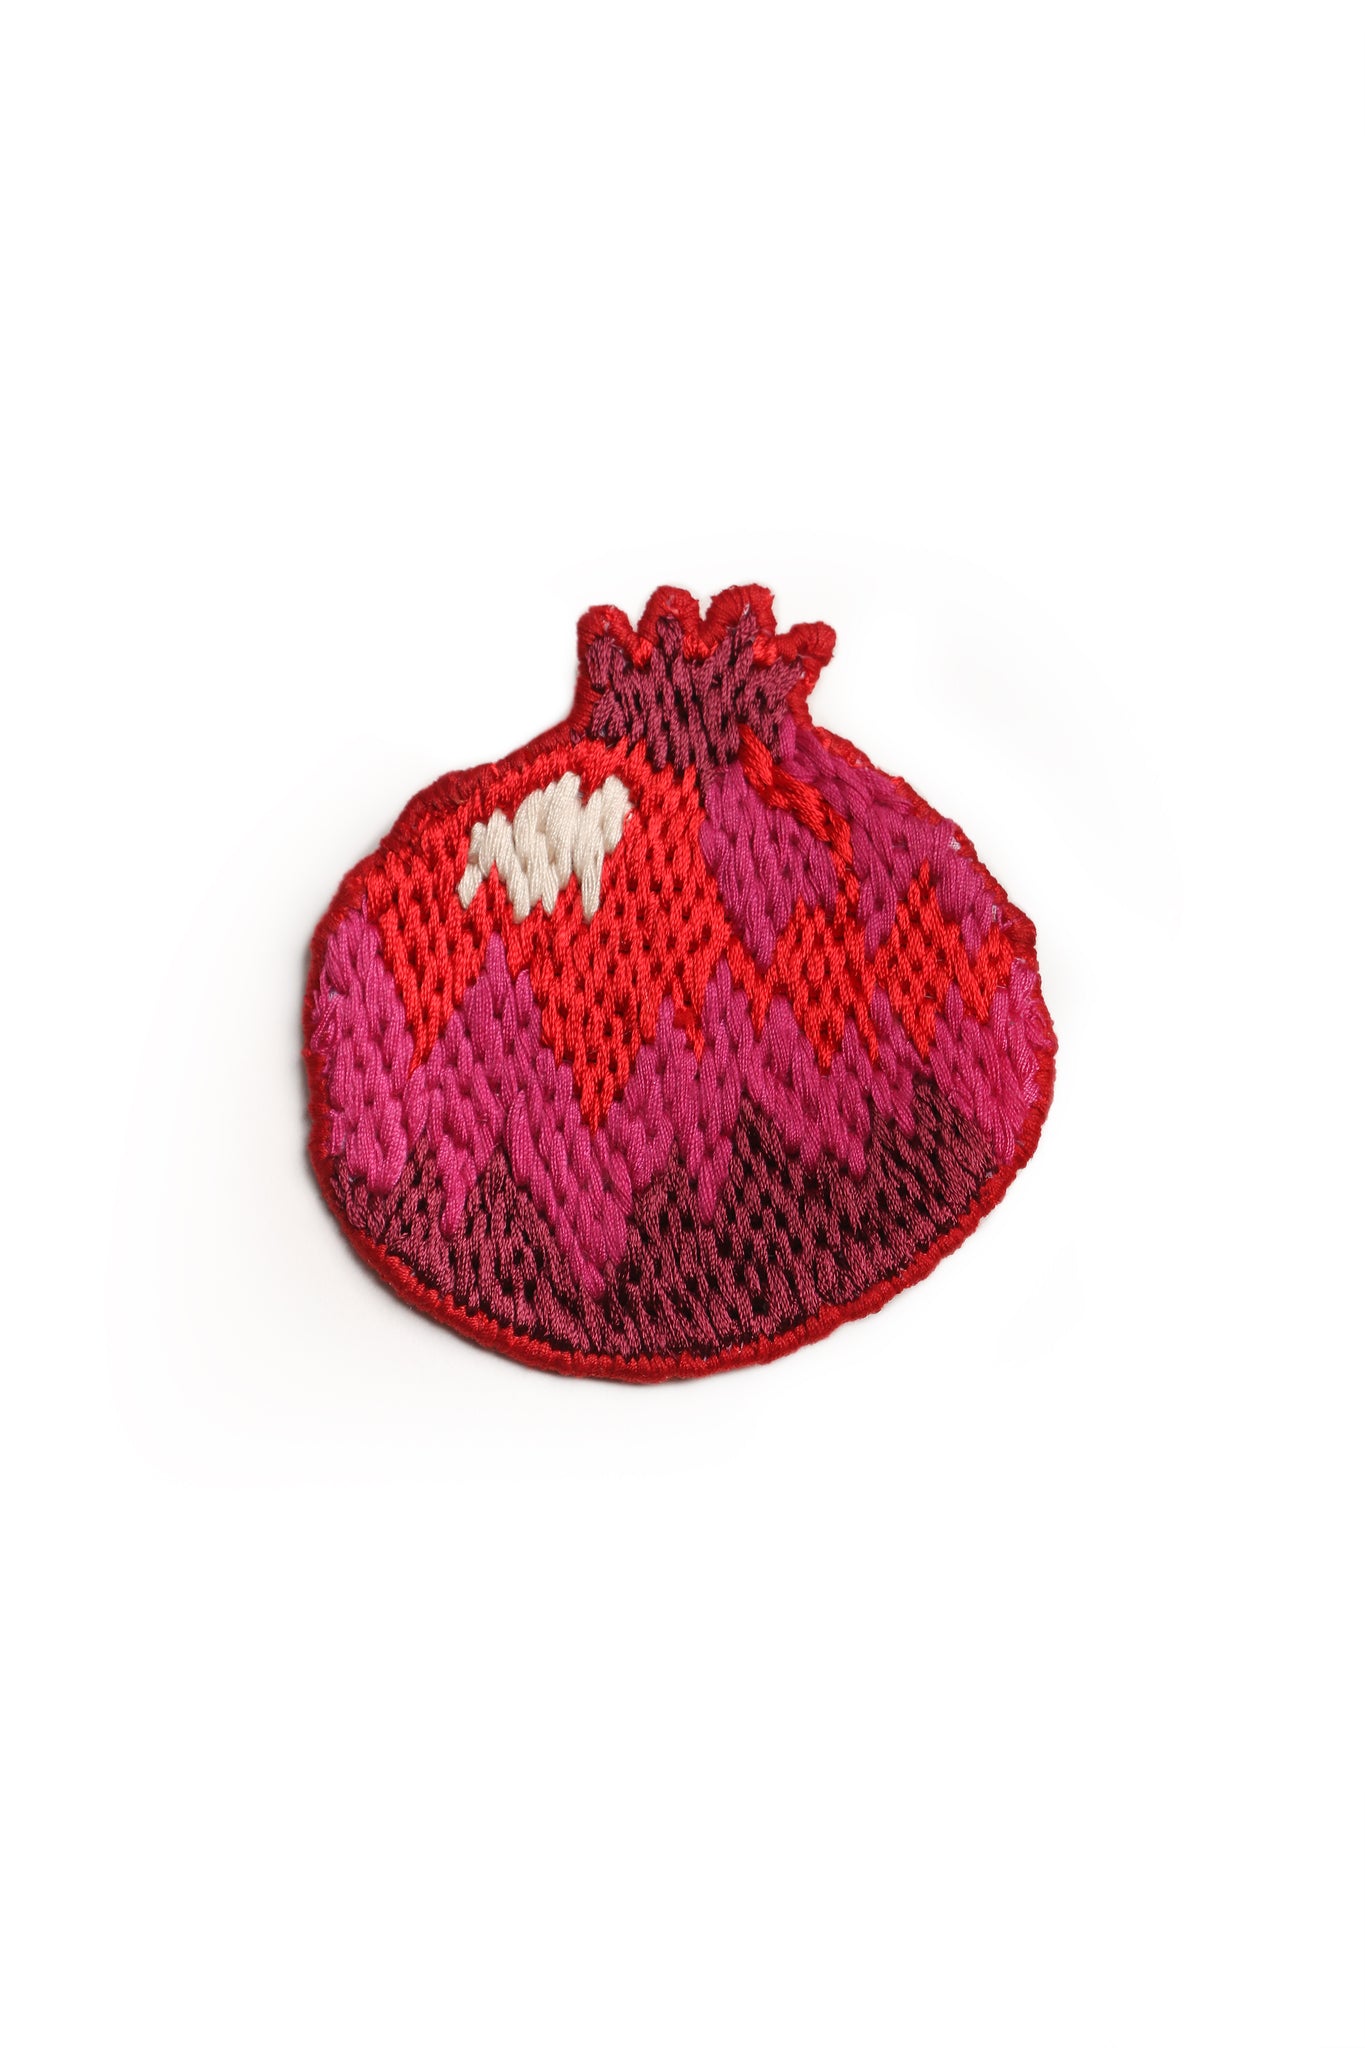 Pomegranate Embroidery Brooch